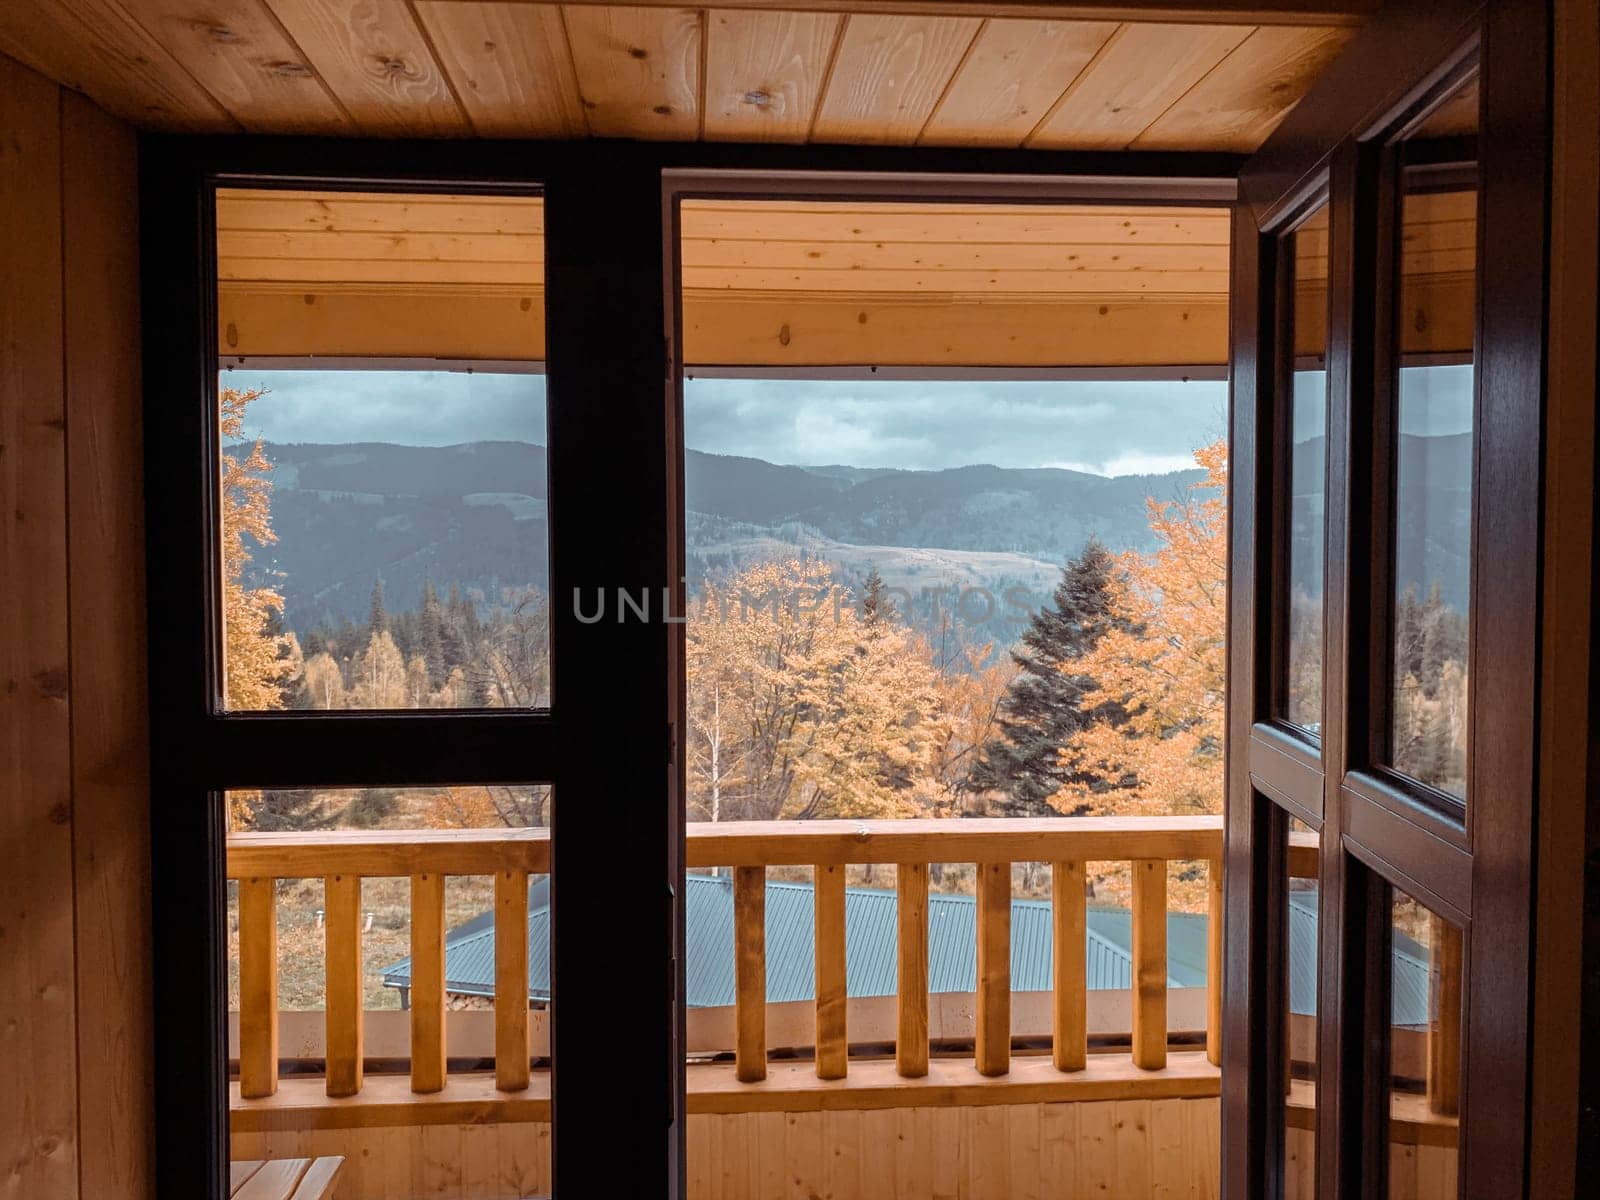 View from the window of a modular house in the mountains